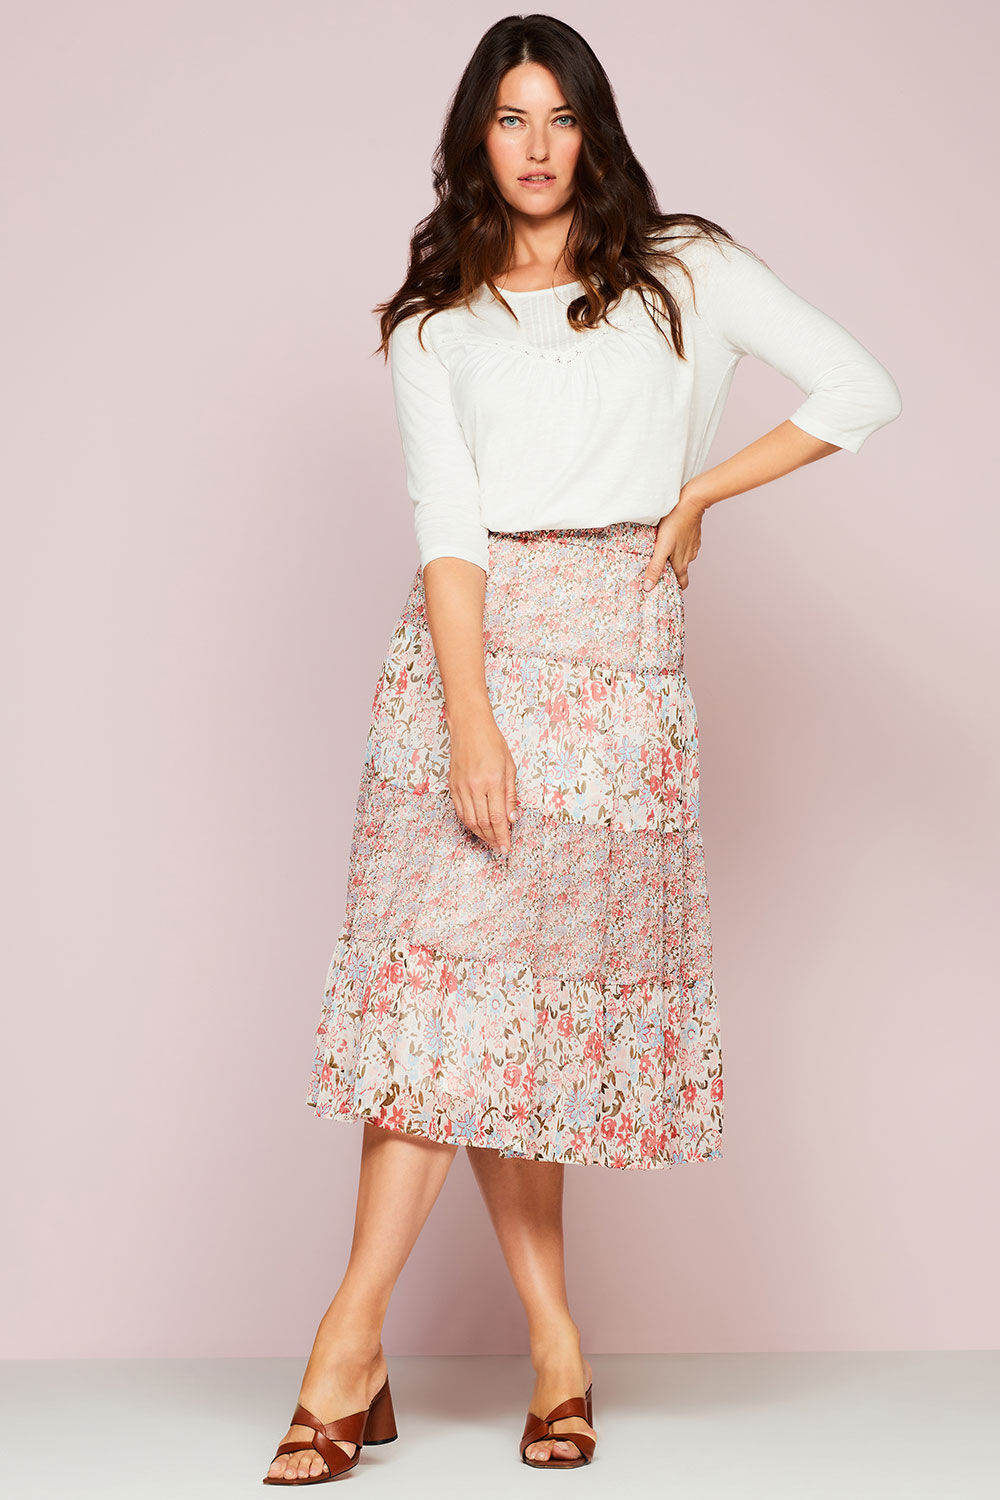 Bonmarche Pink Ditsy Print Tiered Chiffon Elasticated Skirt, Size: 28